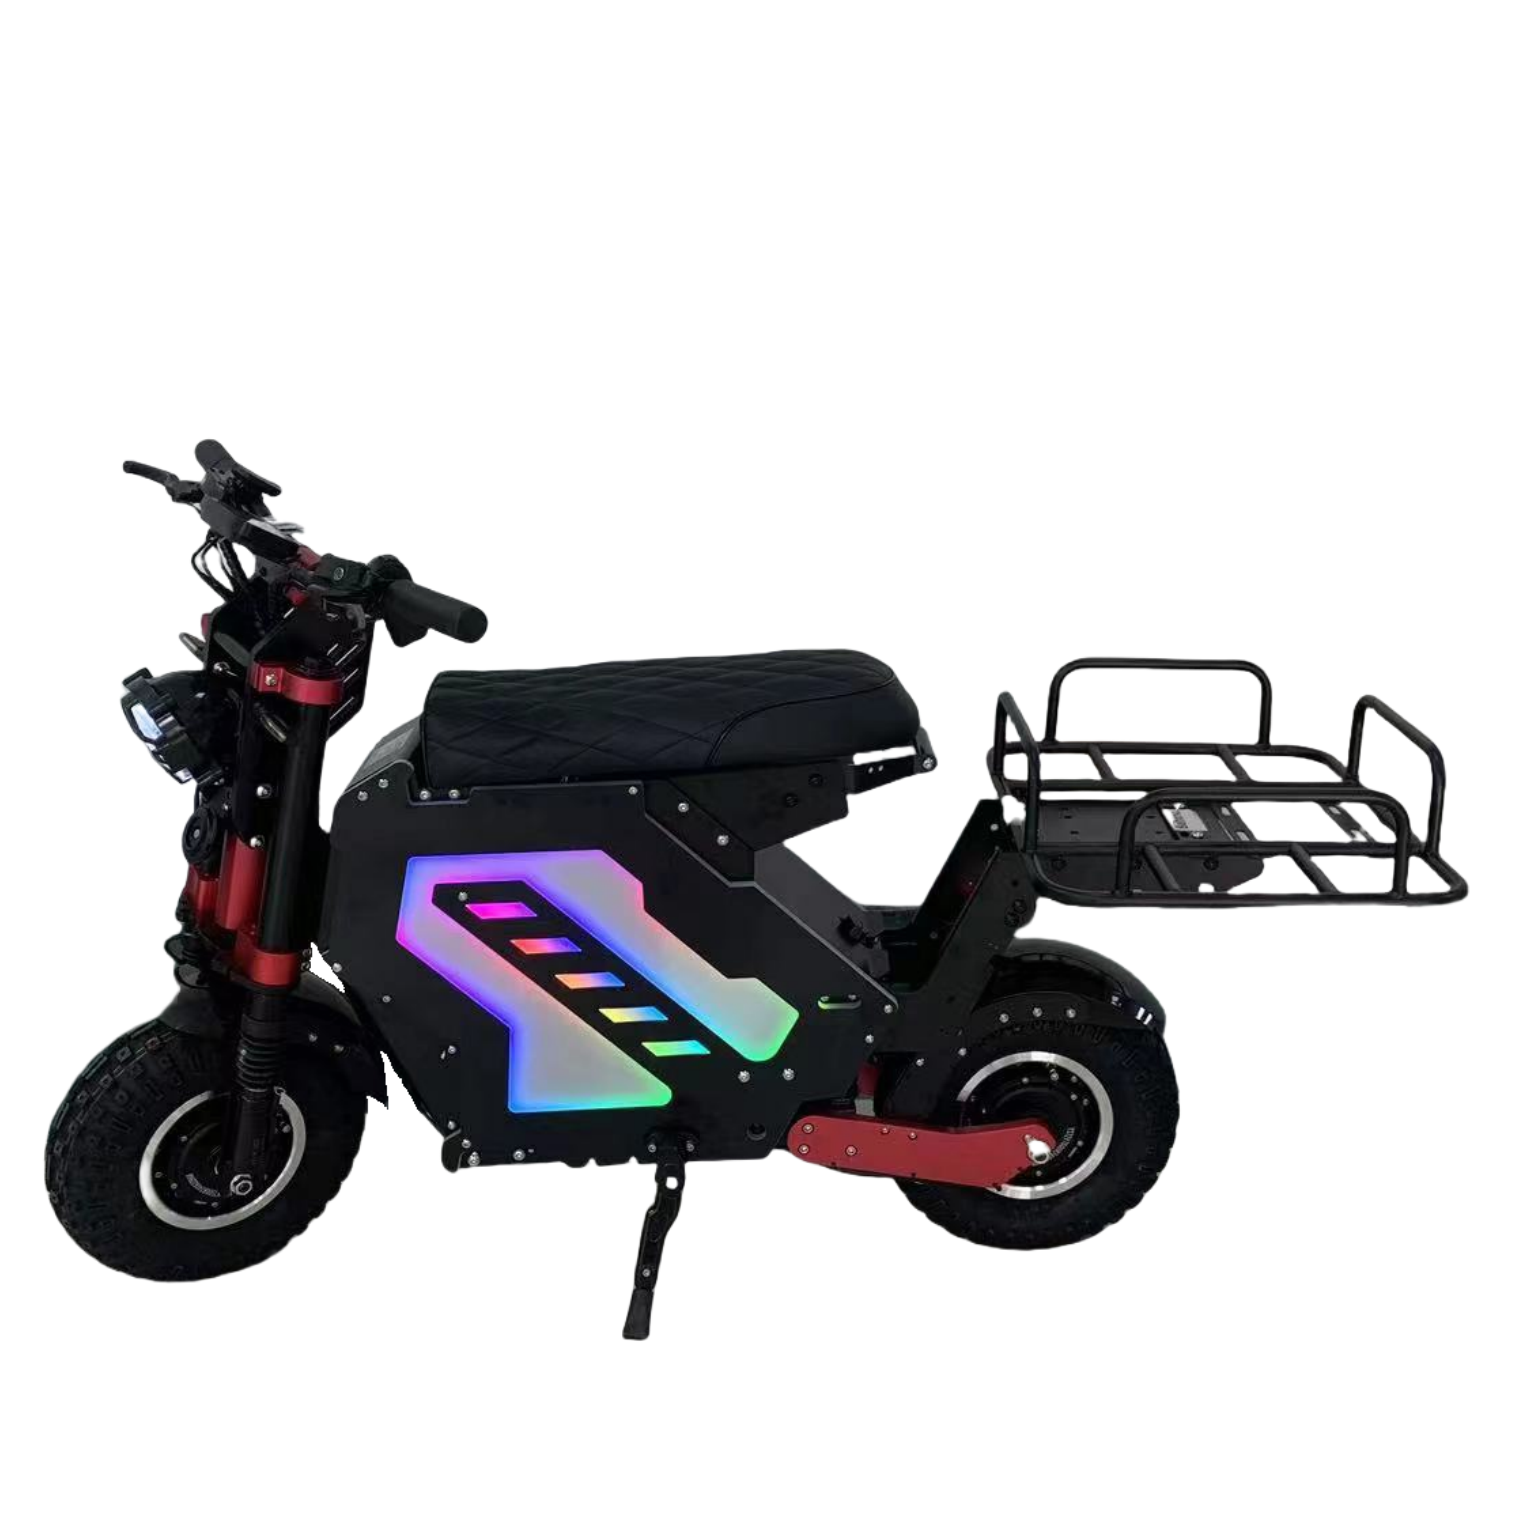 Geofought Molo 5 moped electric scooter Upgraded enlarged rear basket and rack